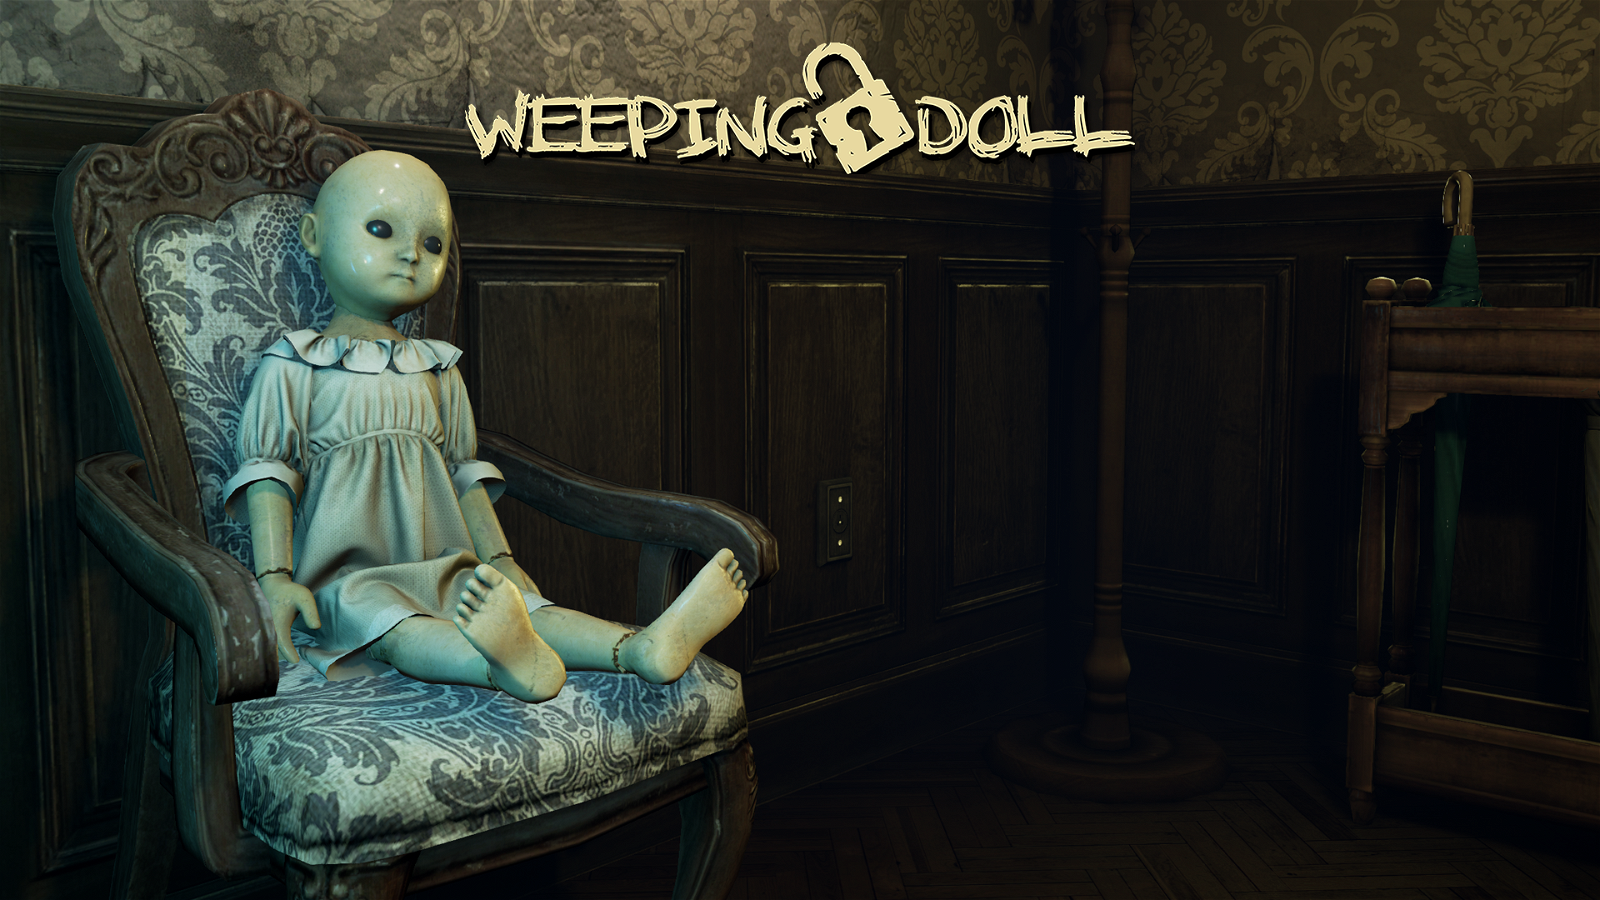 Image of Weeping Doll